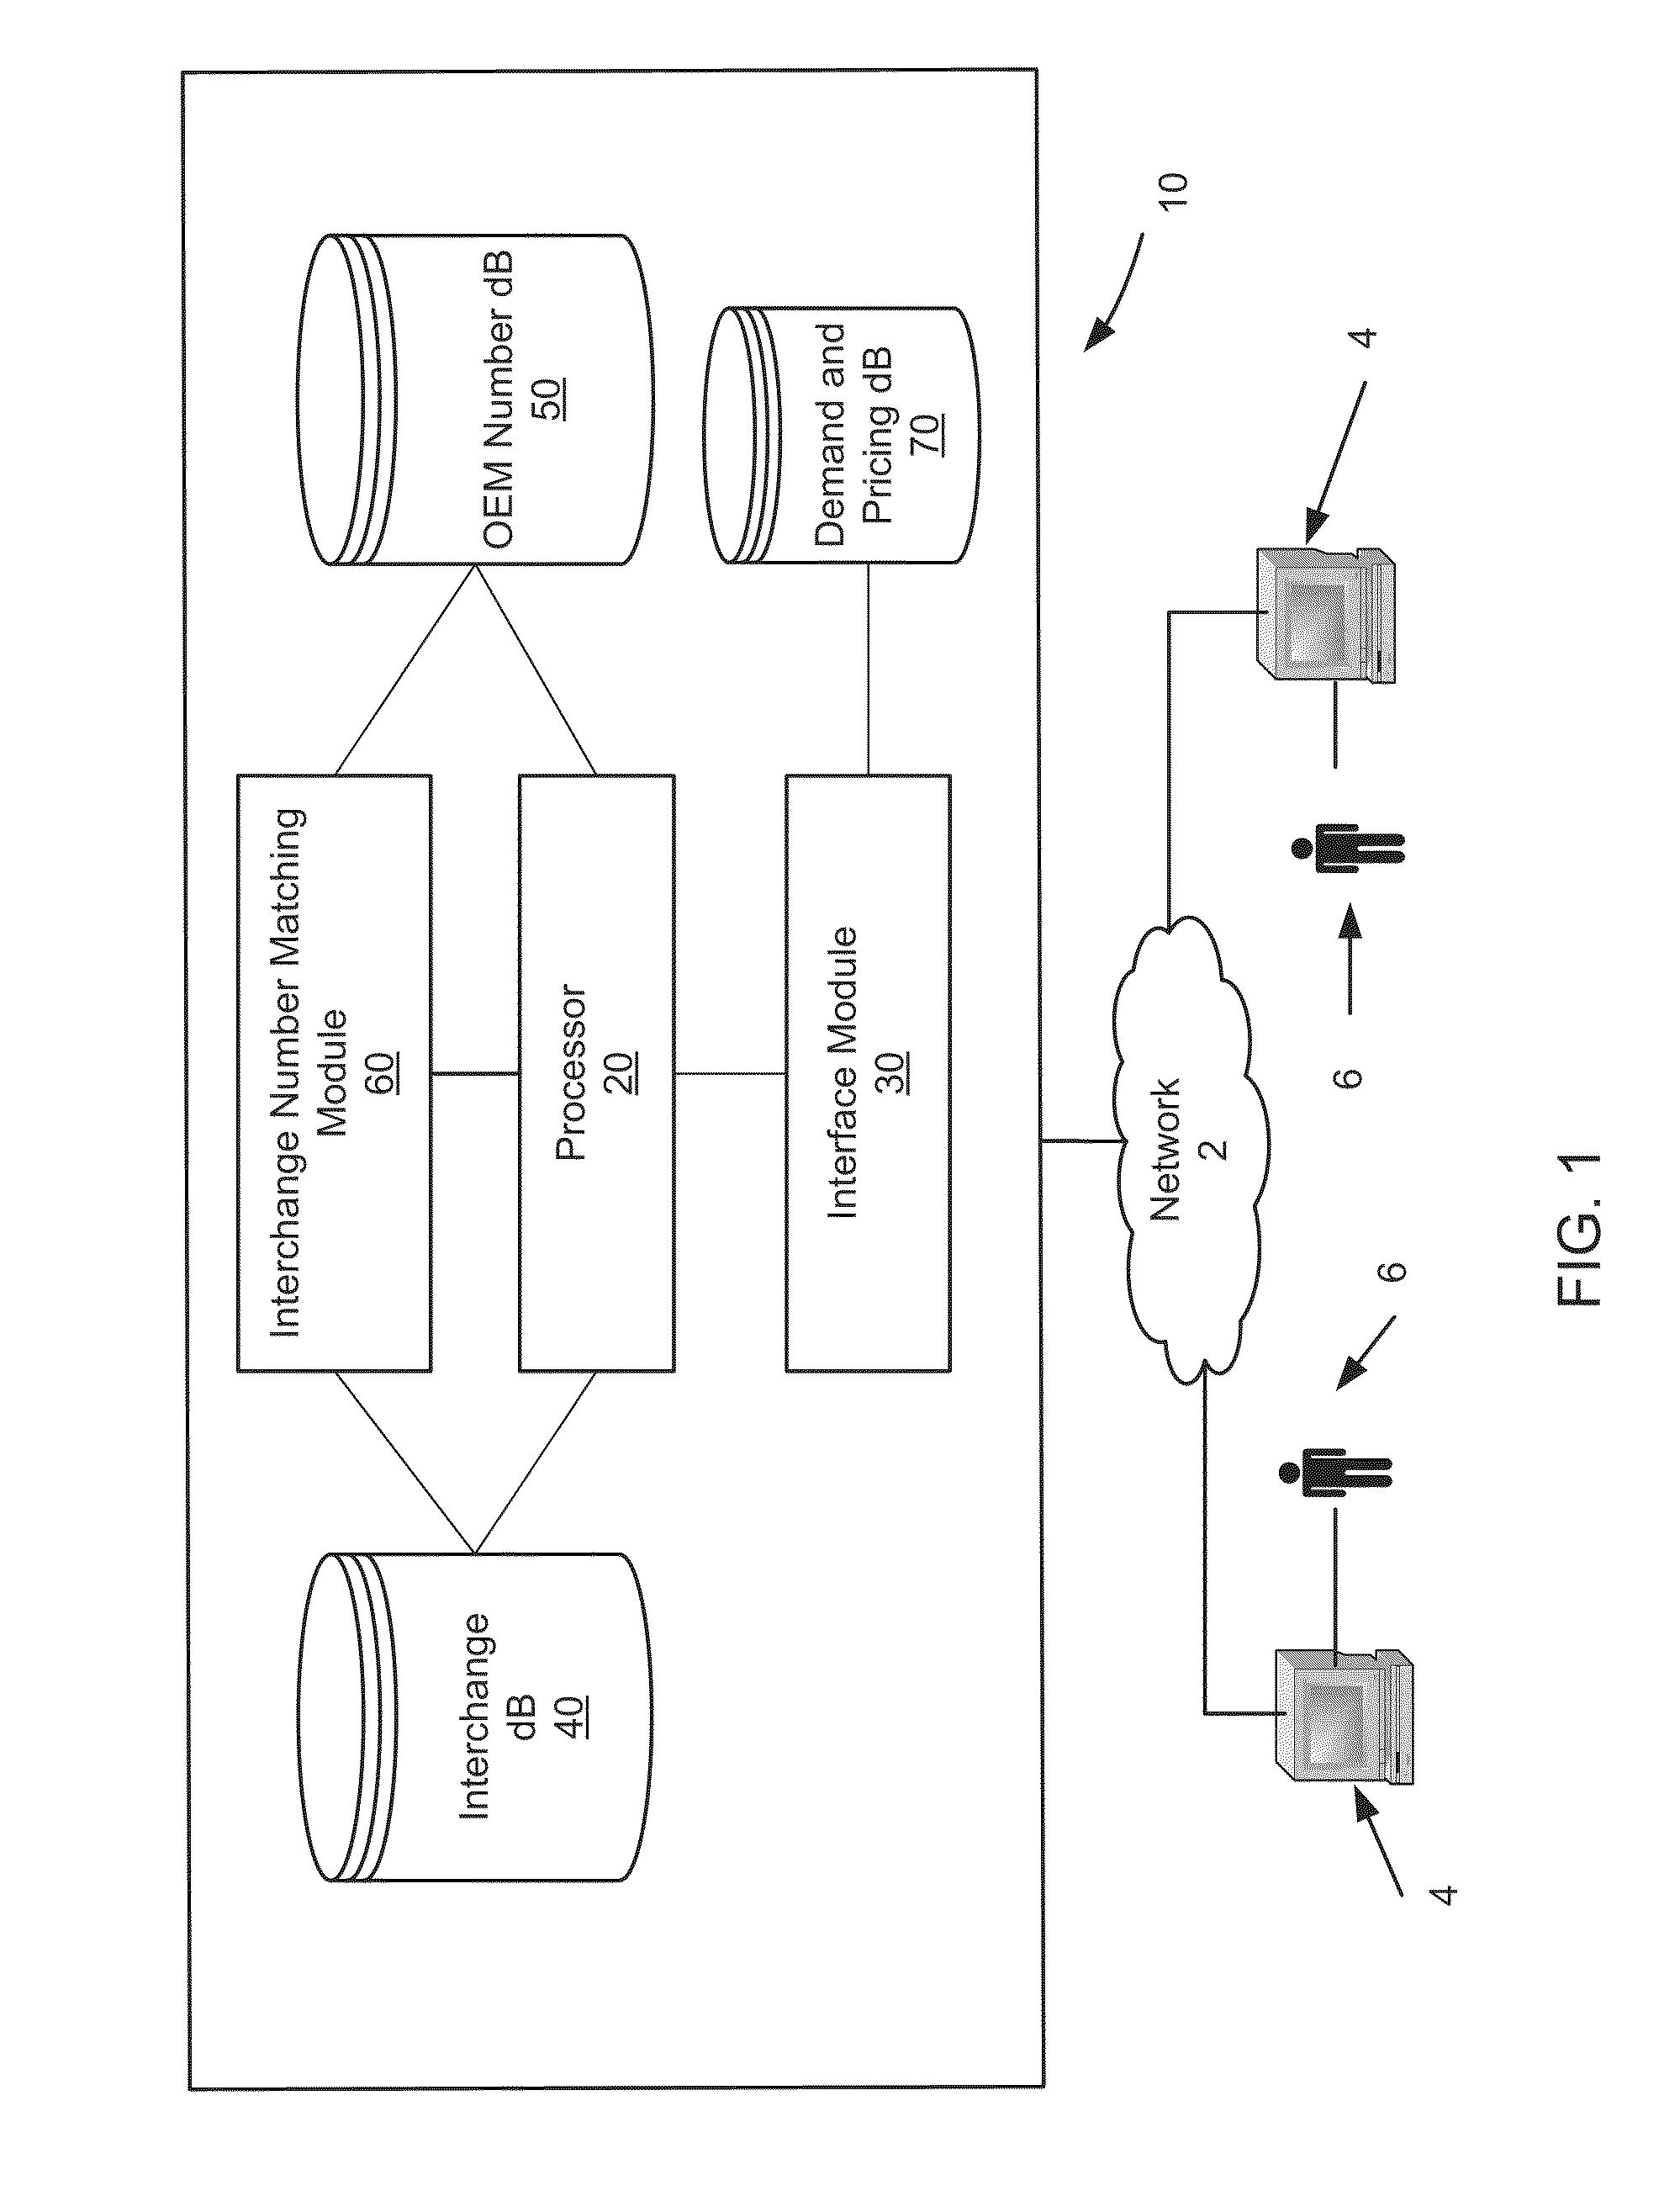 Automotive core fulfillment system and method